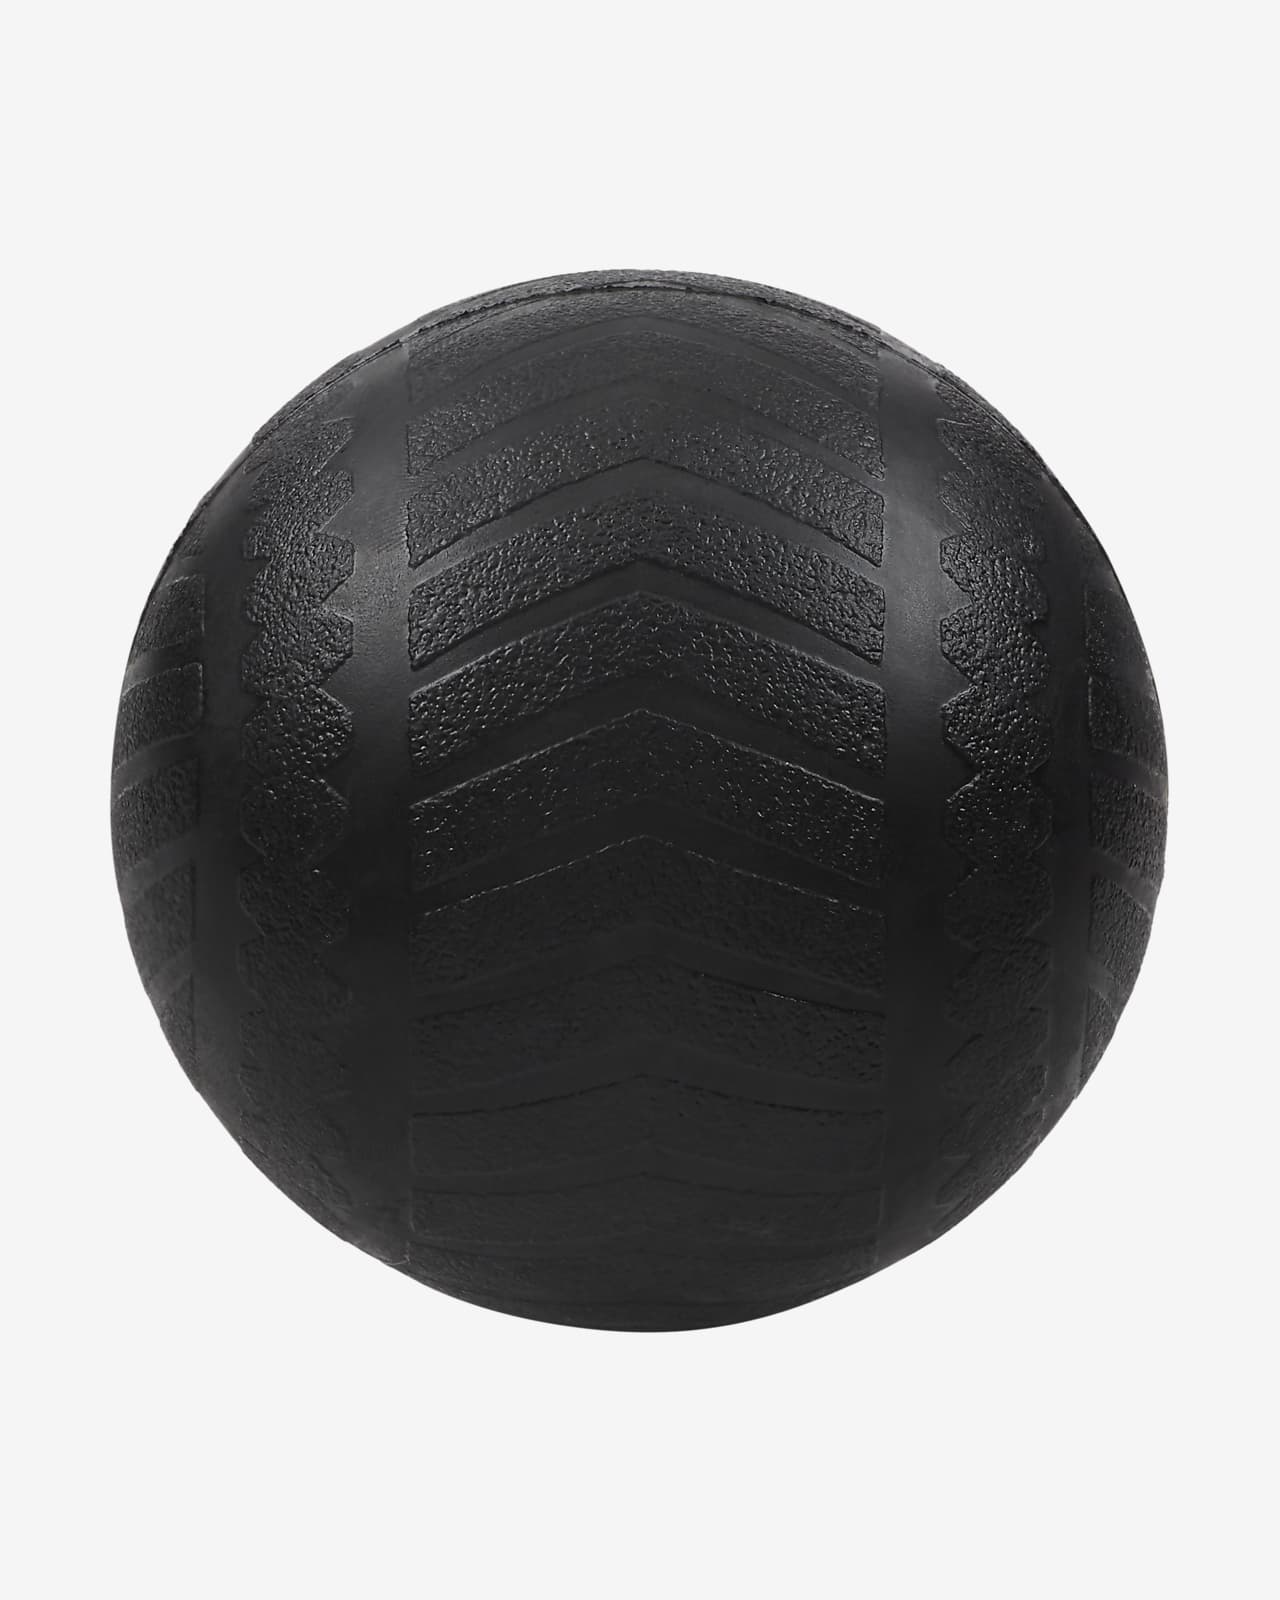 nike inflatable recovery ball